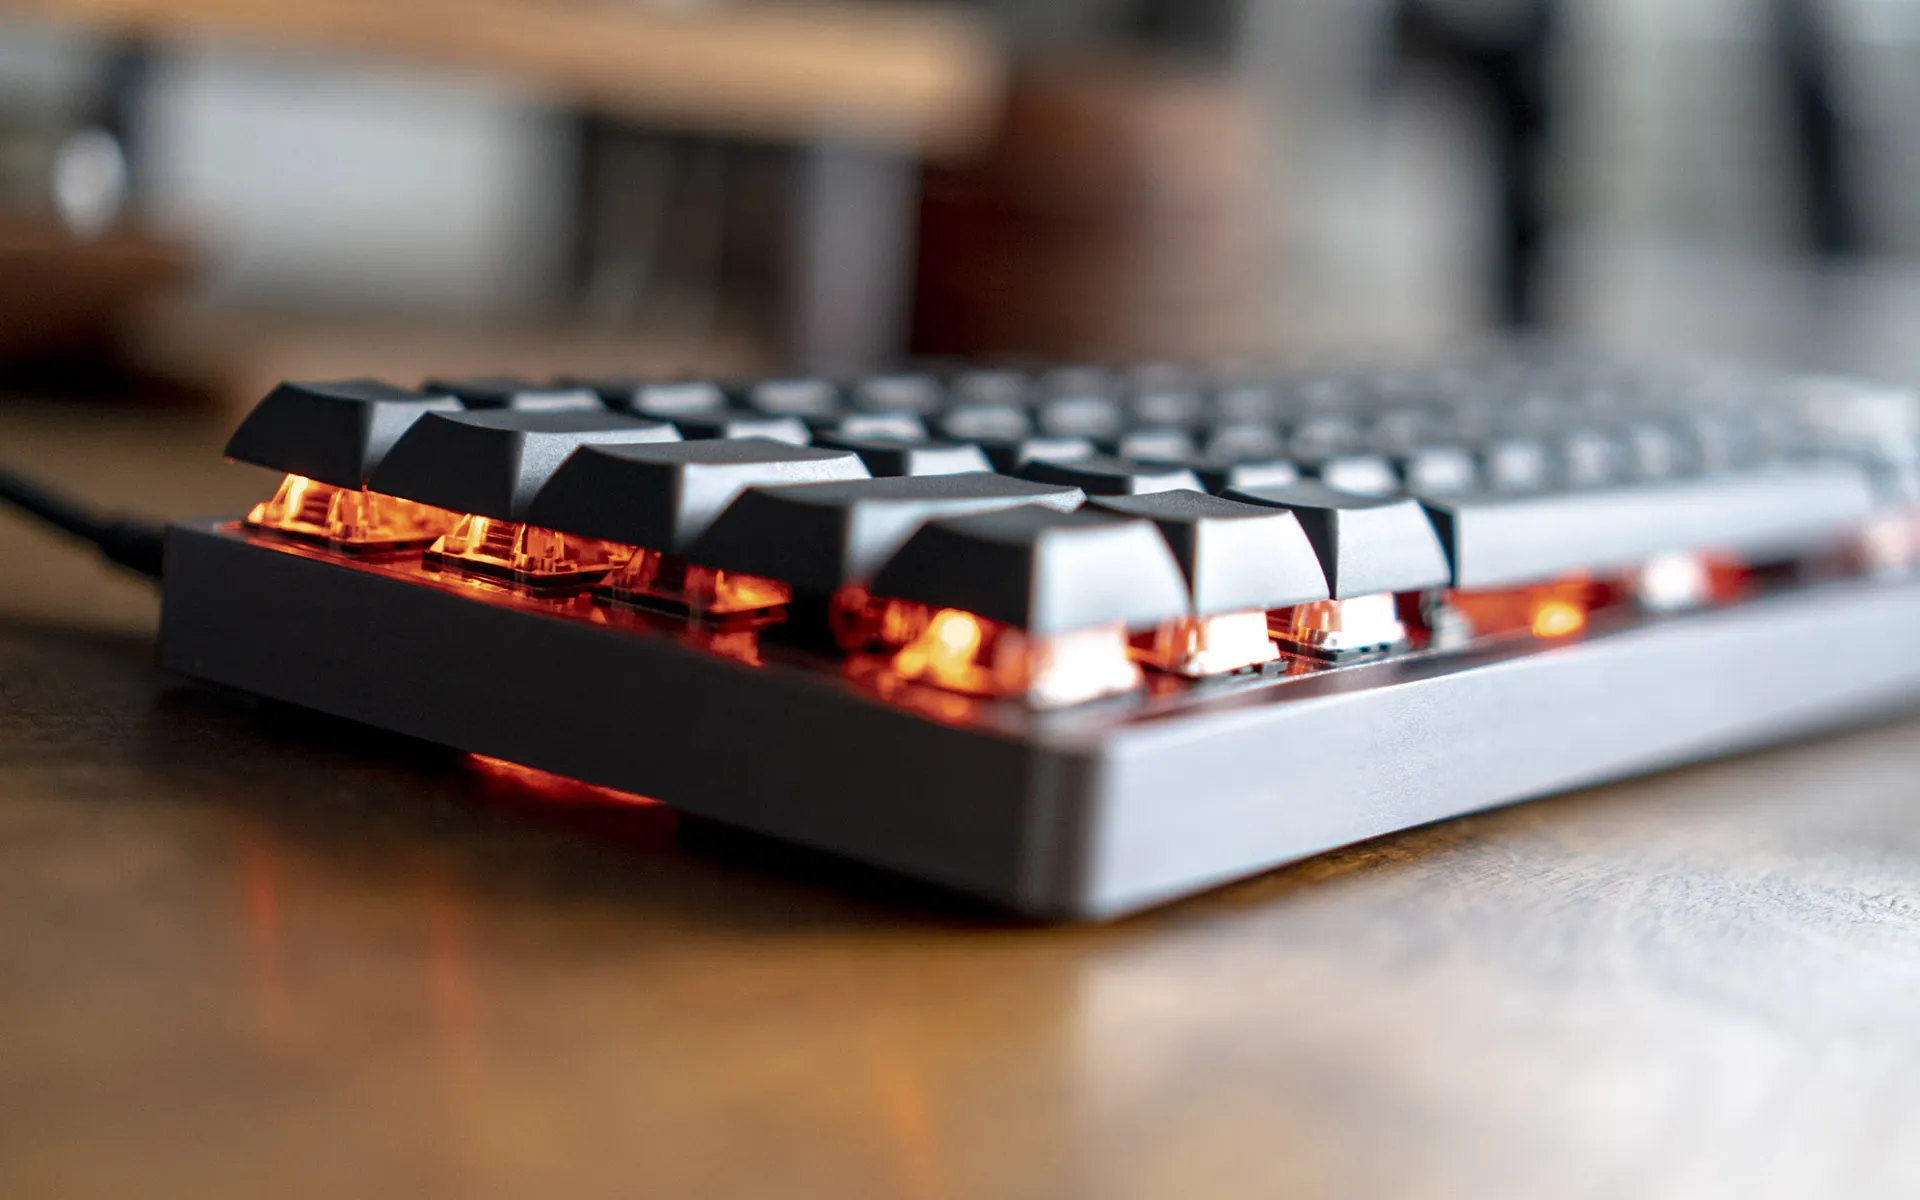 Closeup of the red glow under the keycaps of a mechanical keyboard.